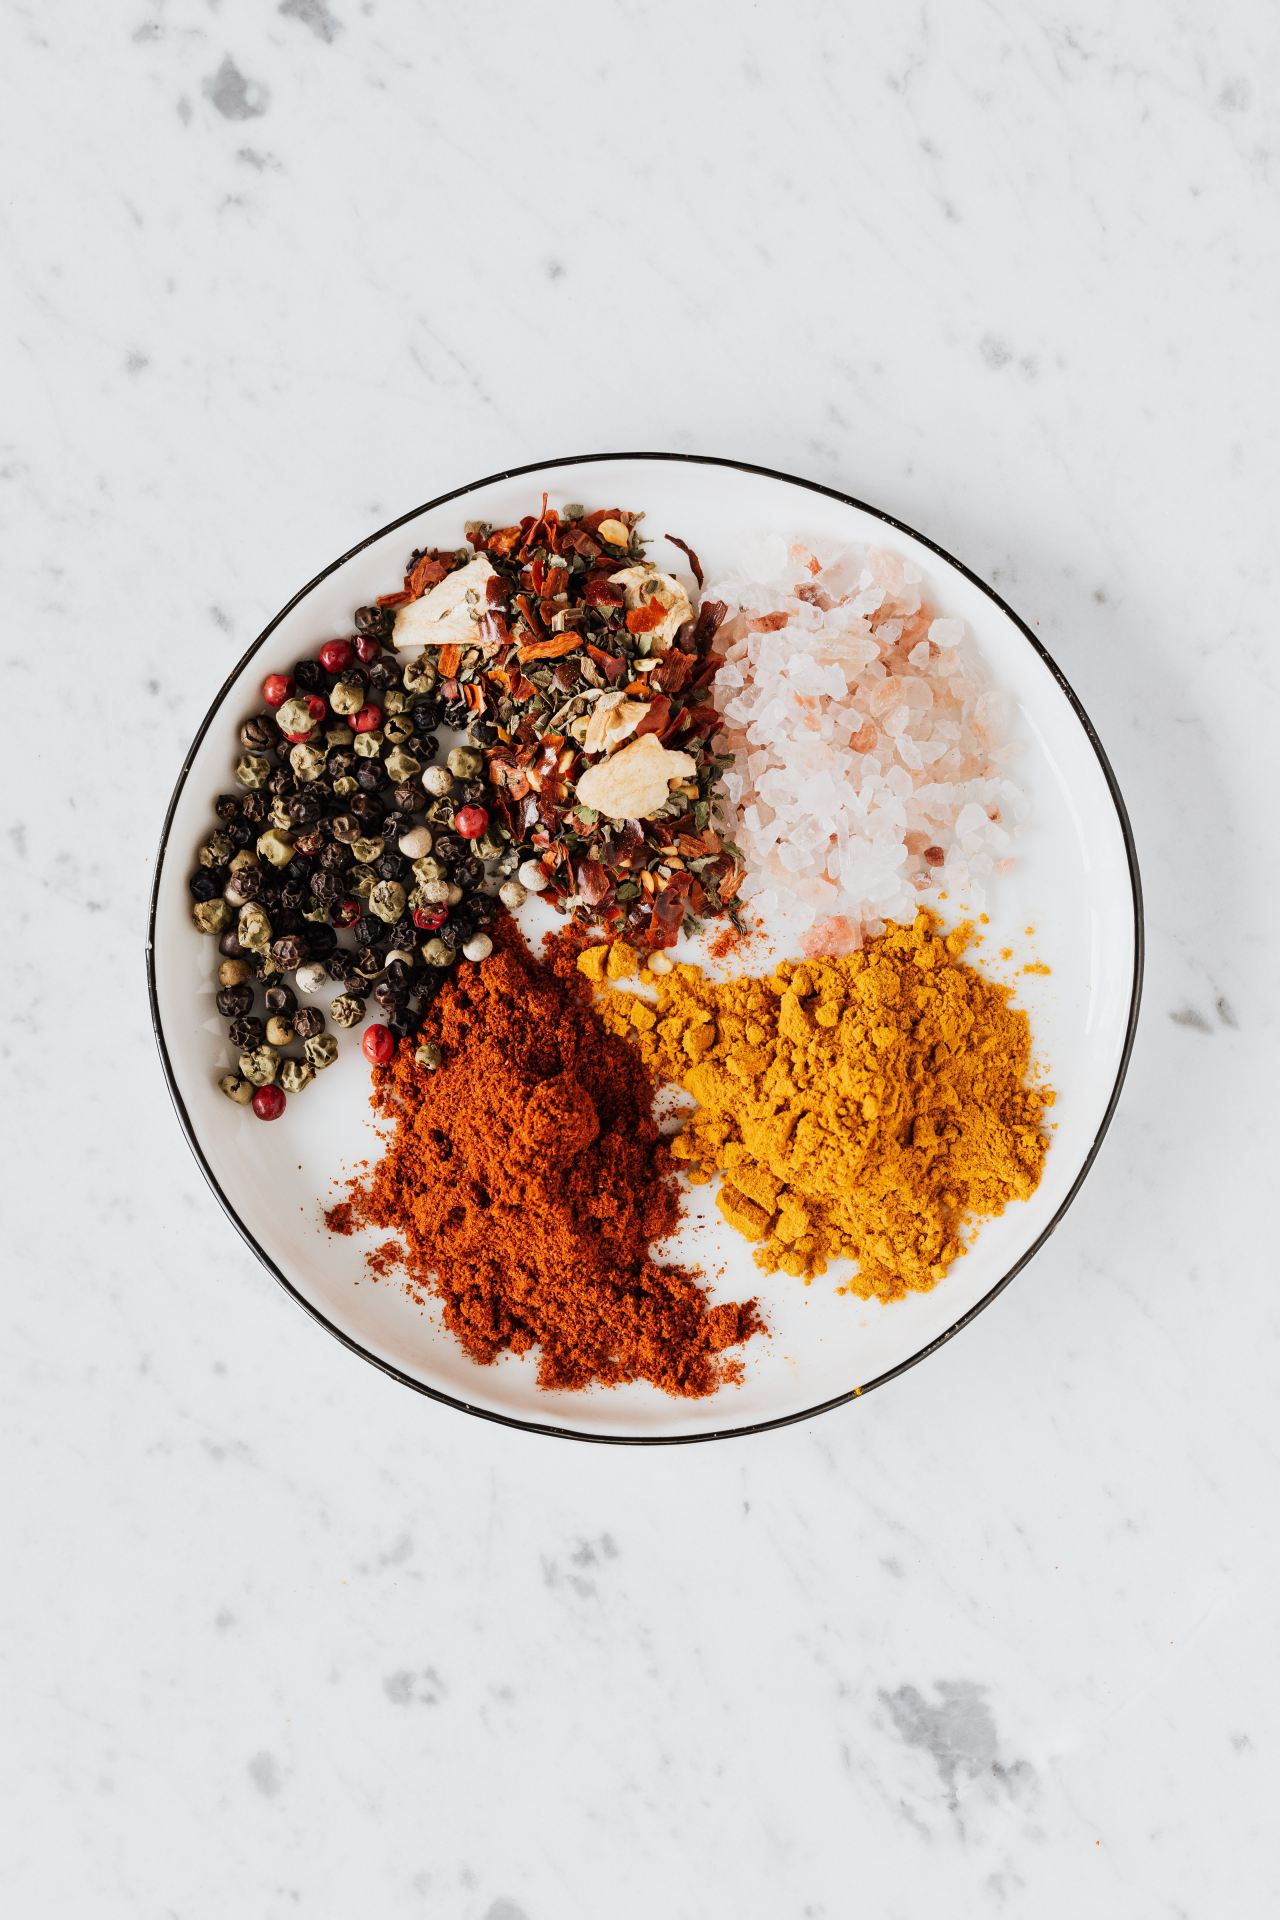 A selection of spices on a plate